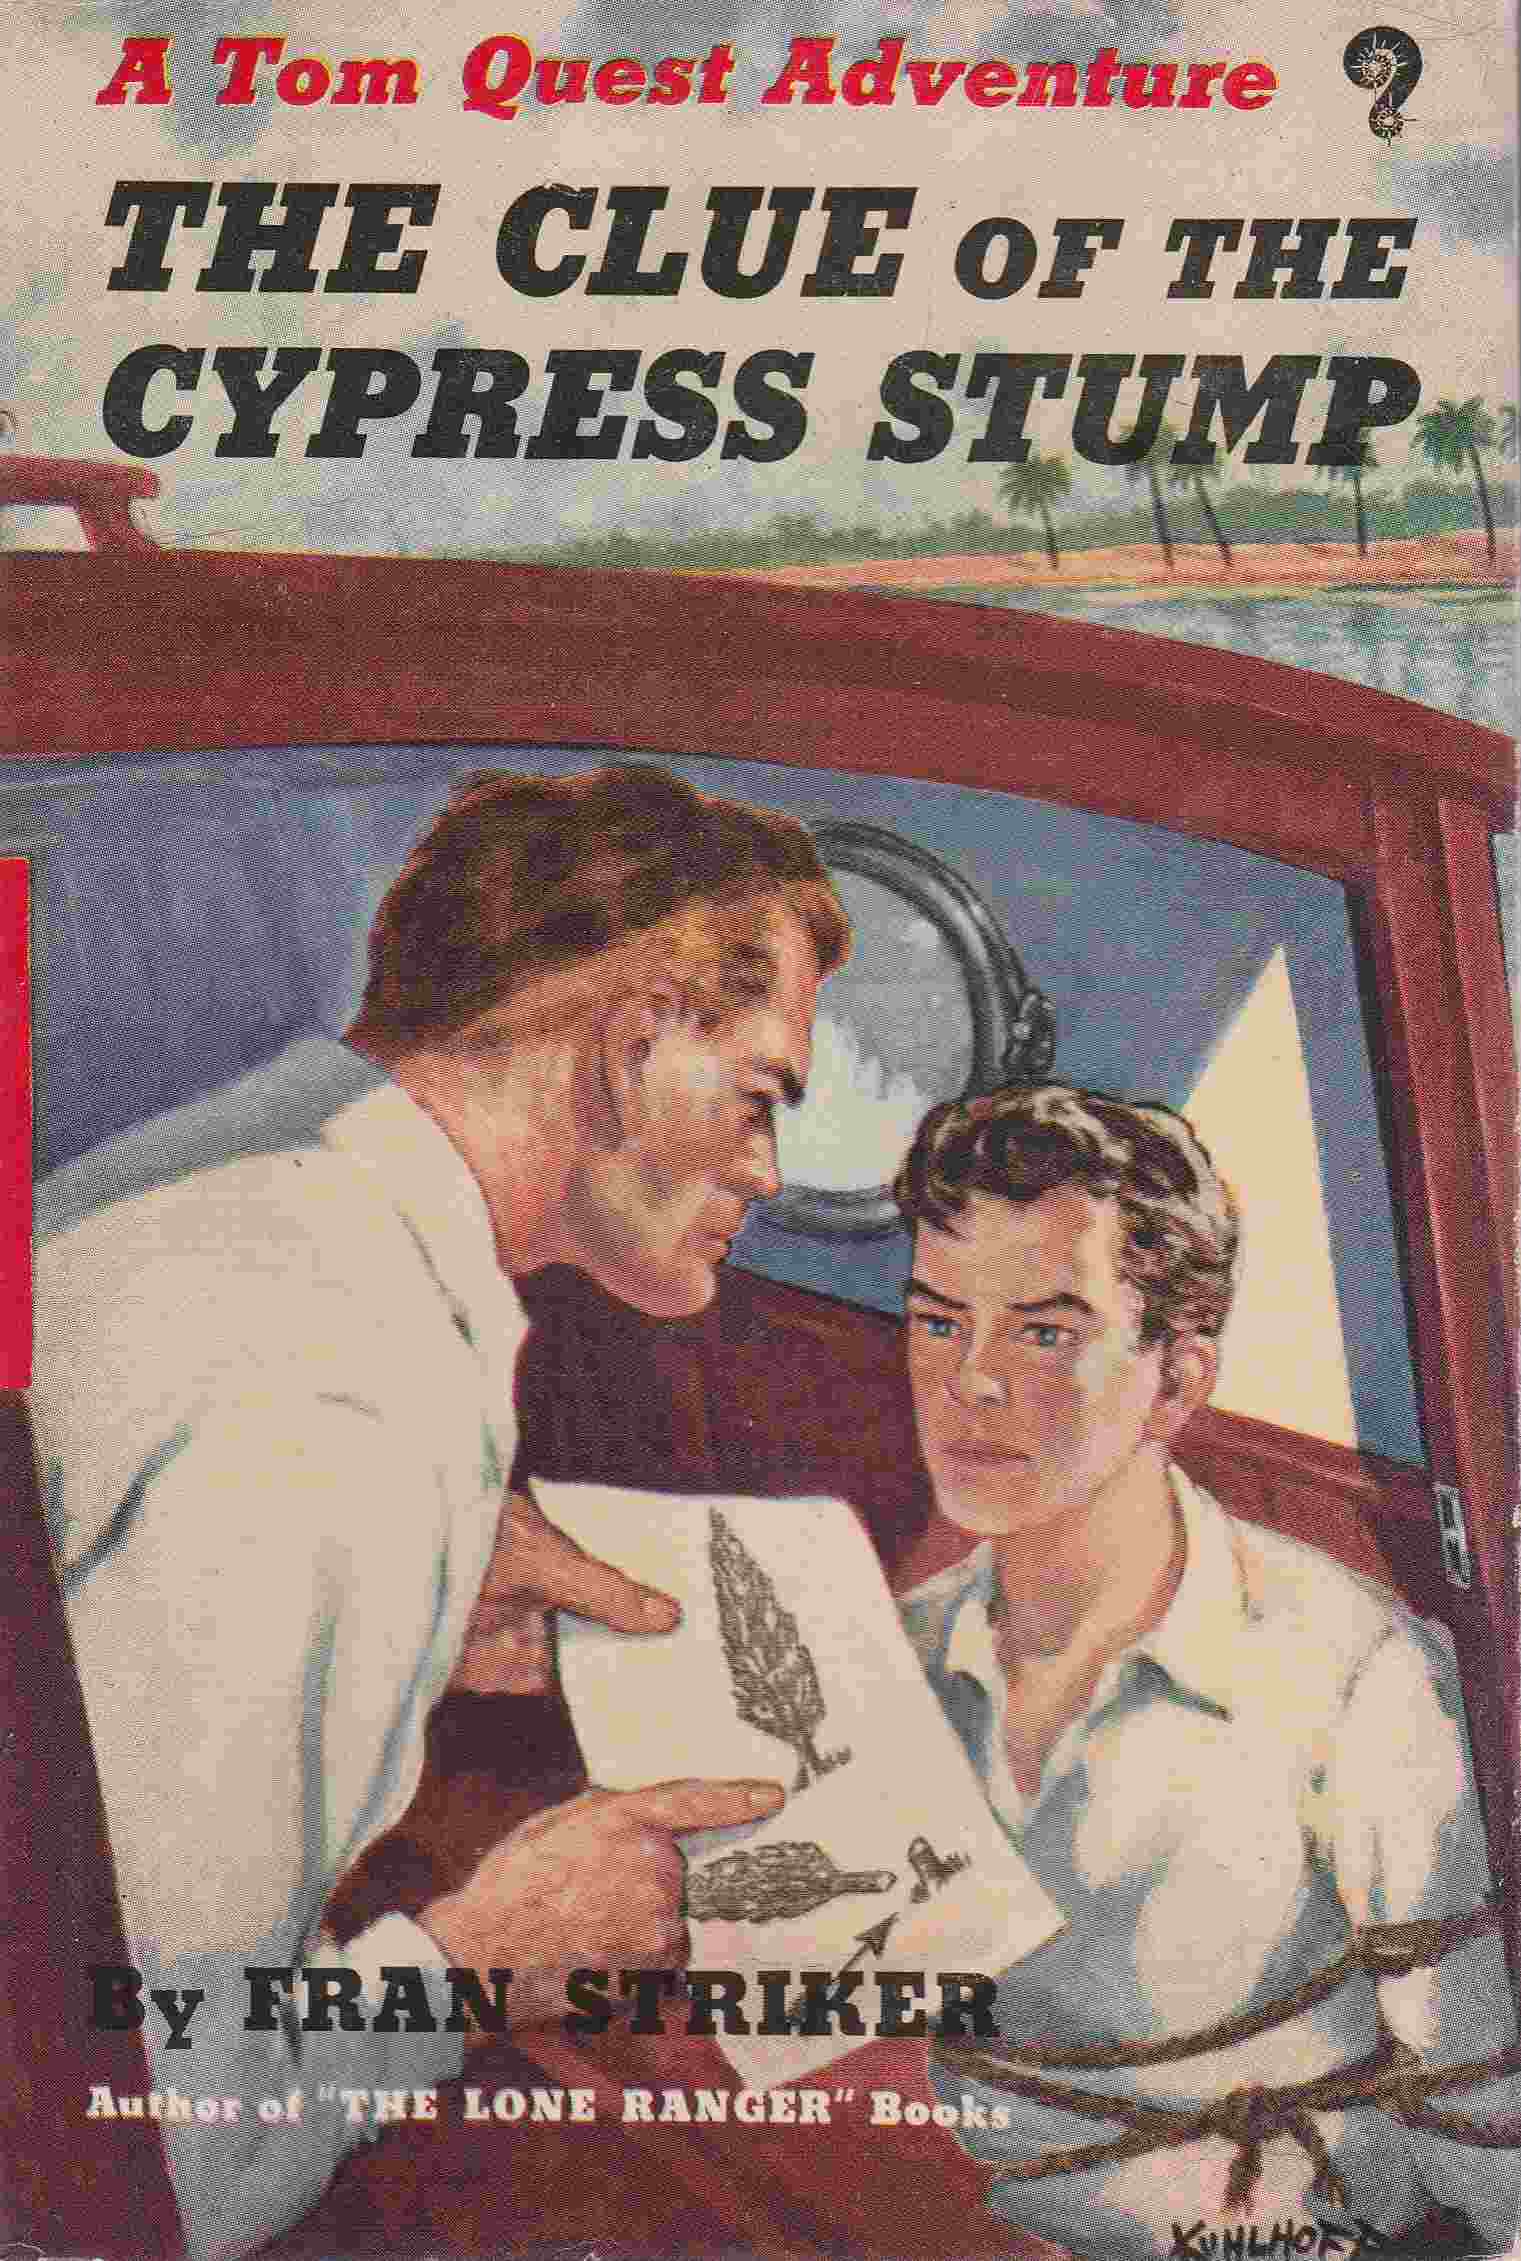 The Clue of the Cypress Stump